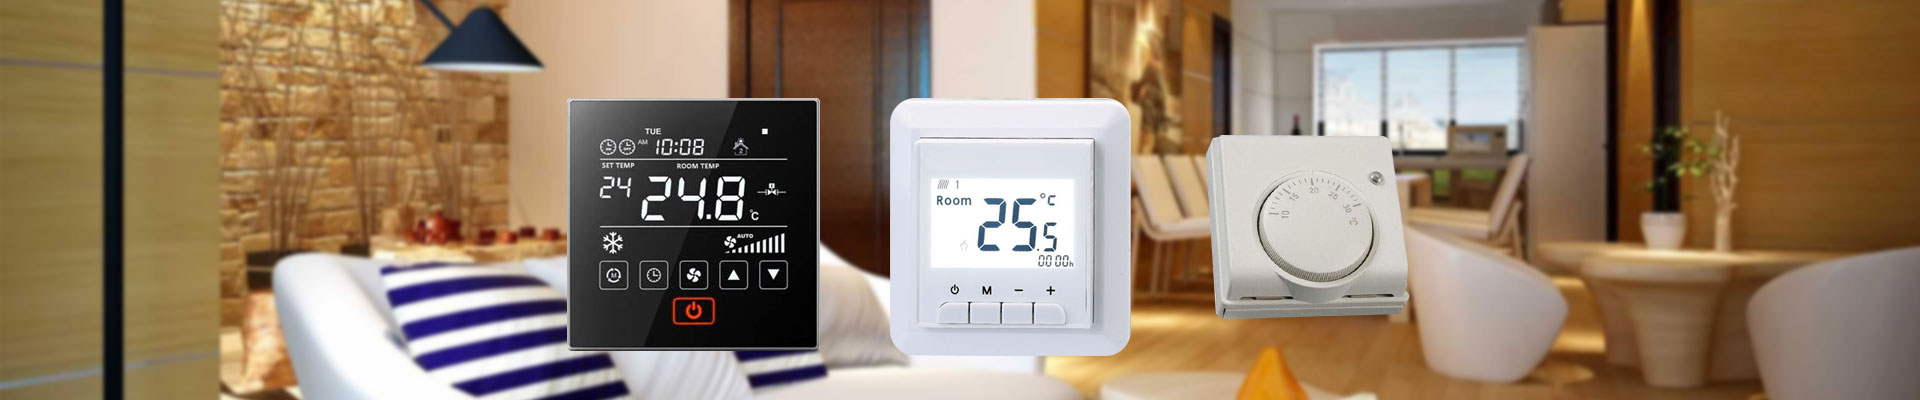 Smart Life APP Control Manifold Floor Heating Room Thermostat Wifi Wireless With RF Receiver For Water Boiler Heating